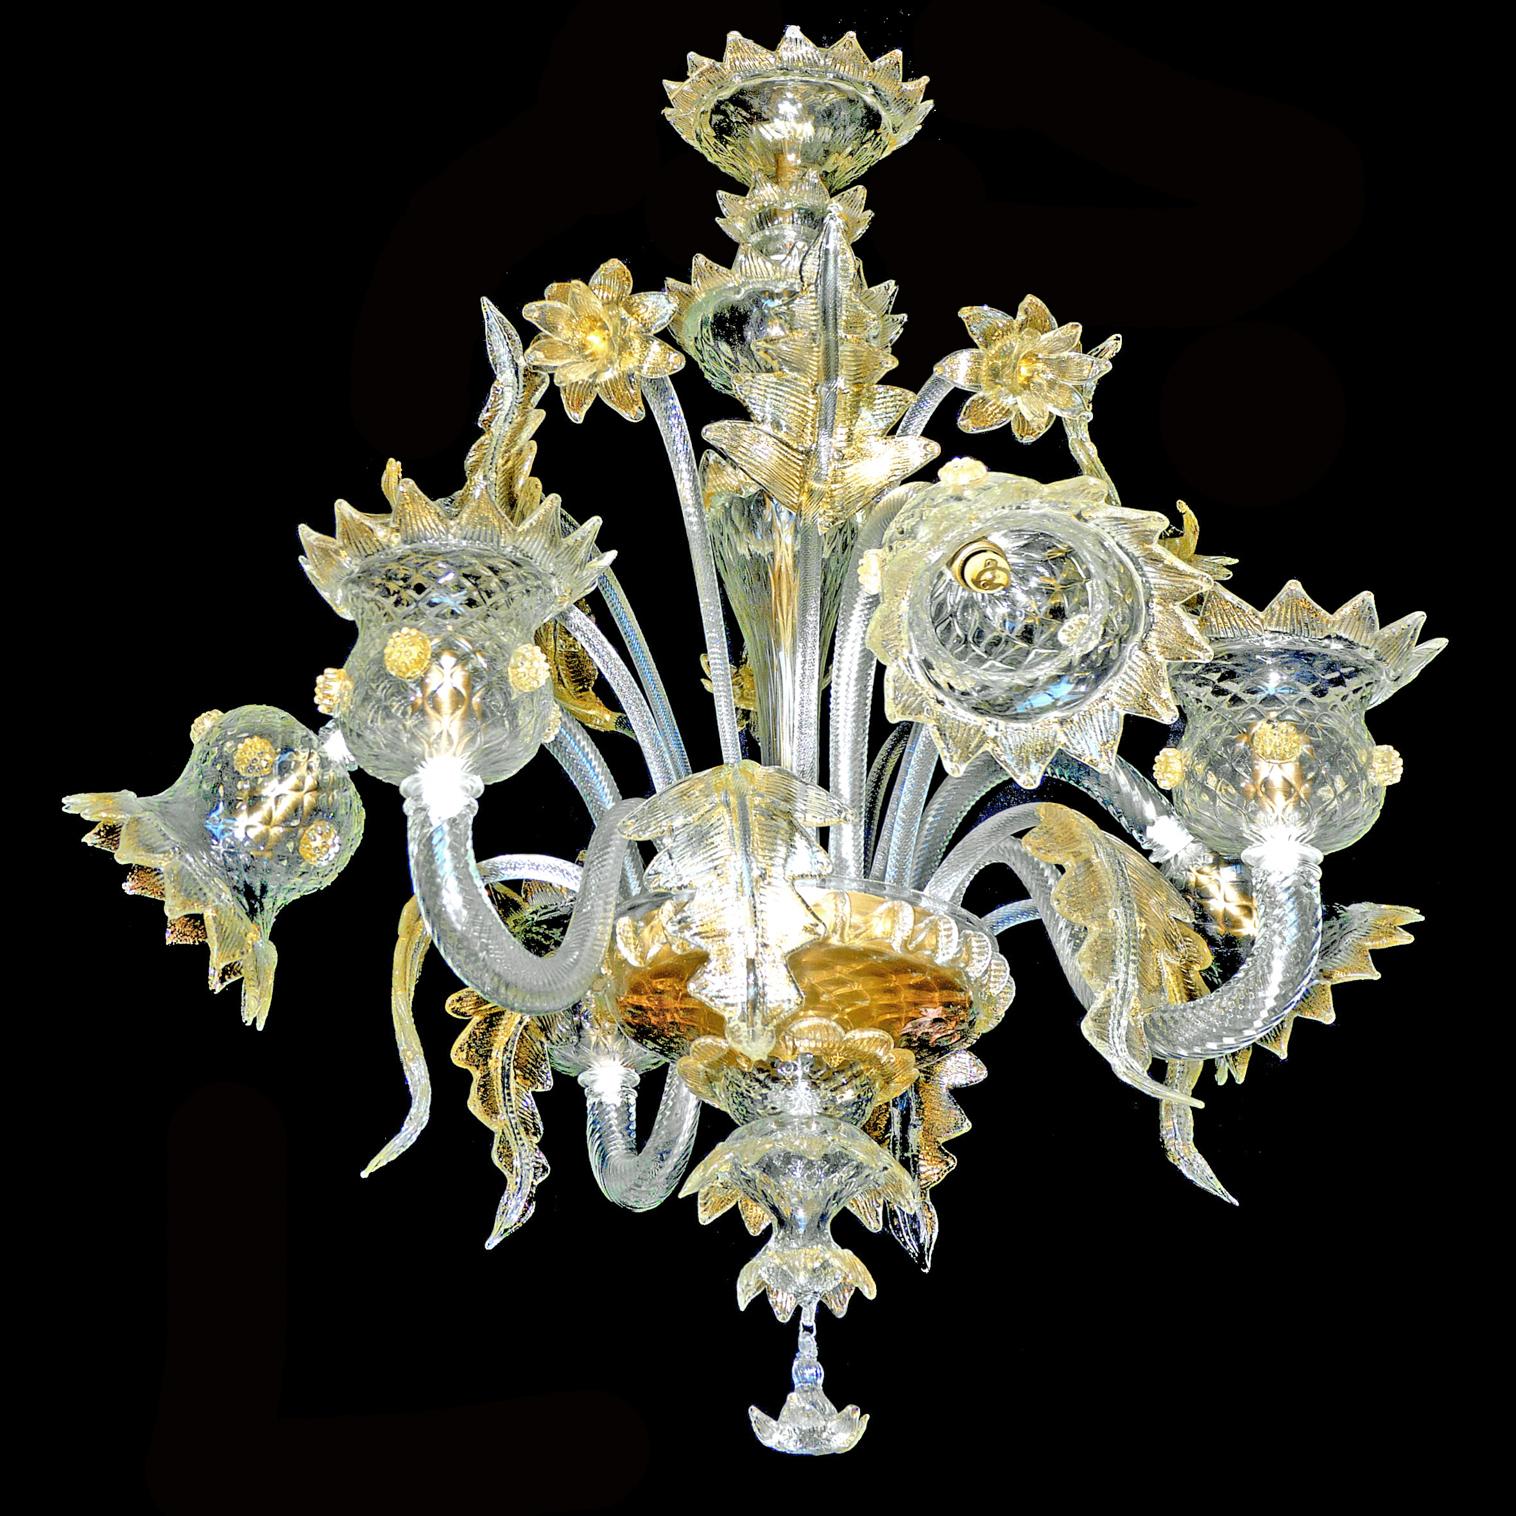 Impressive stunning and rare gold dusted Venetian Murano chandelier. This gorgeous light fixture has hand blown textured sparkling glass with gold inclusion.
Measures:
Diameter 29.52 in/ 75 cm
Height 35.5 in/ 90 cm
6 light bulbs E 14/ good working